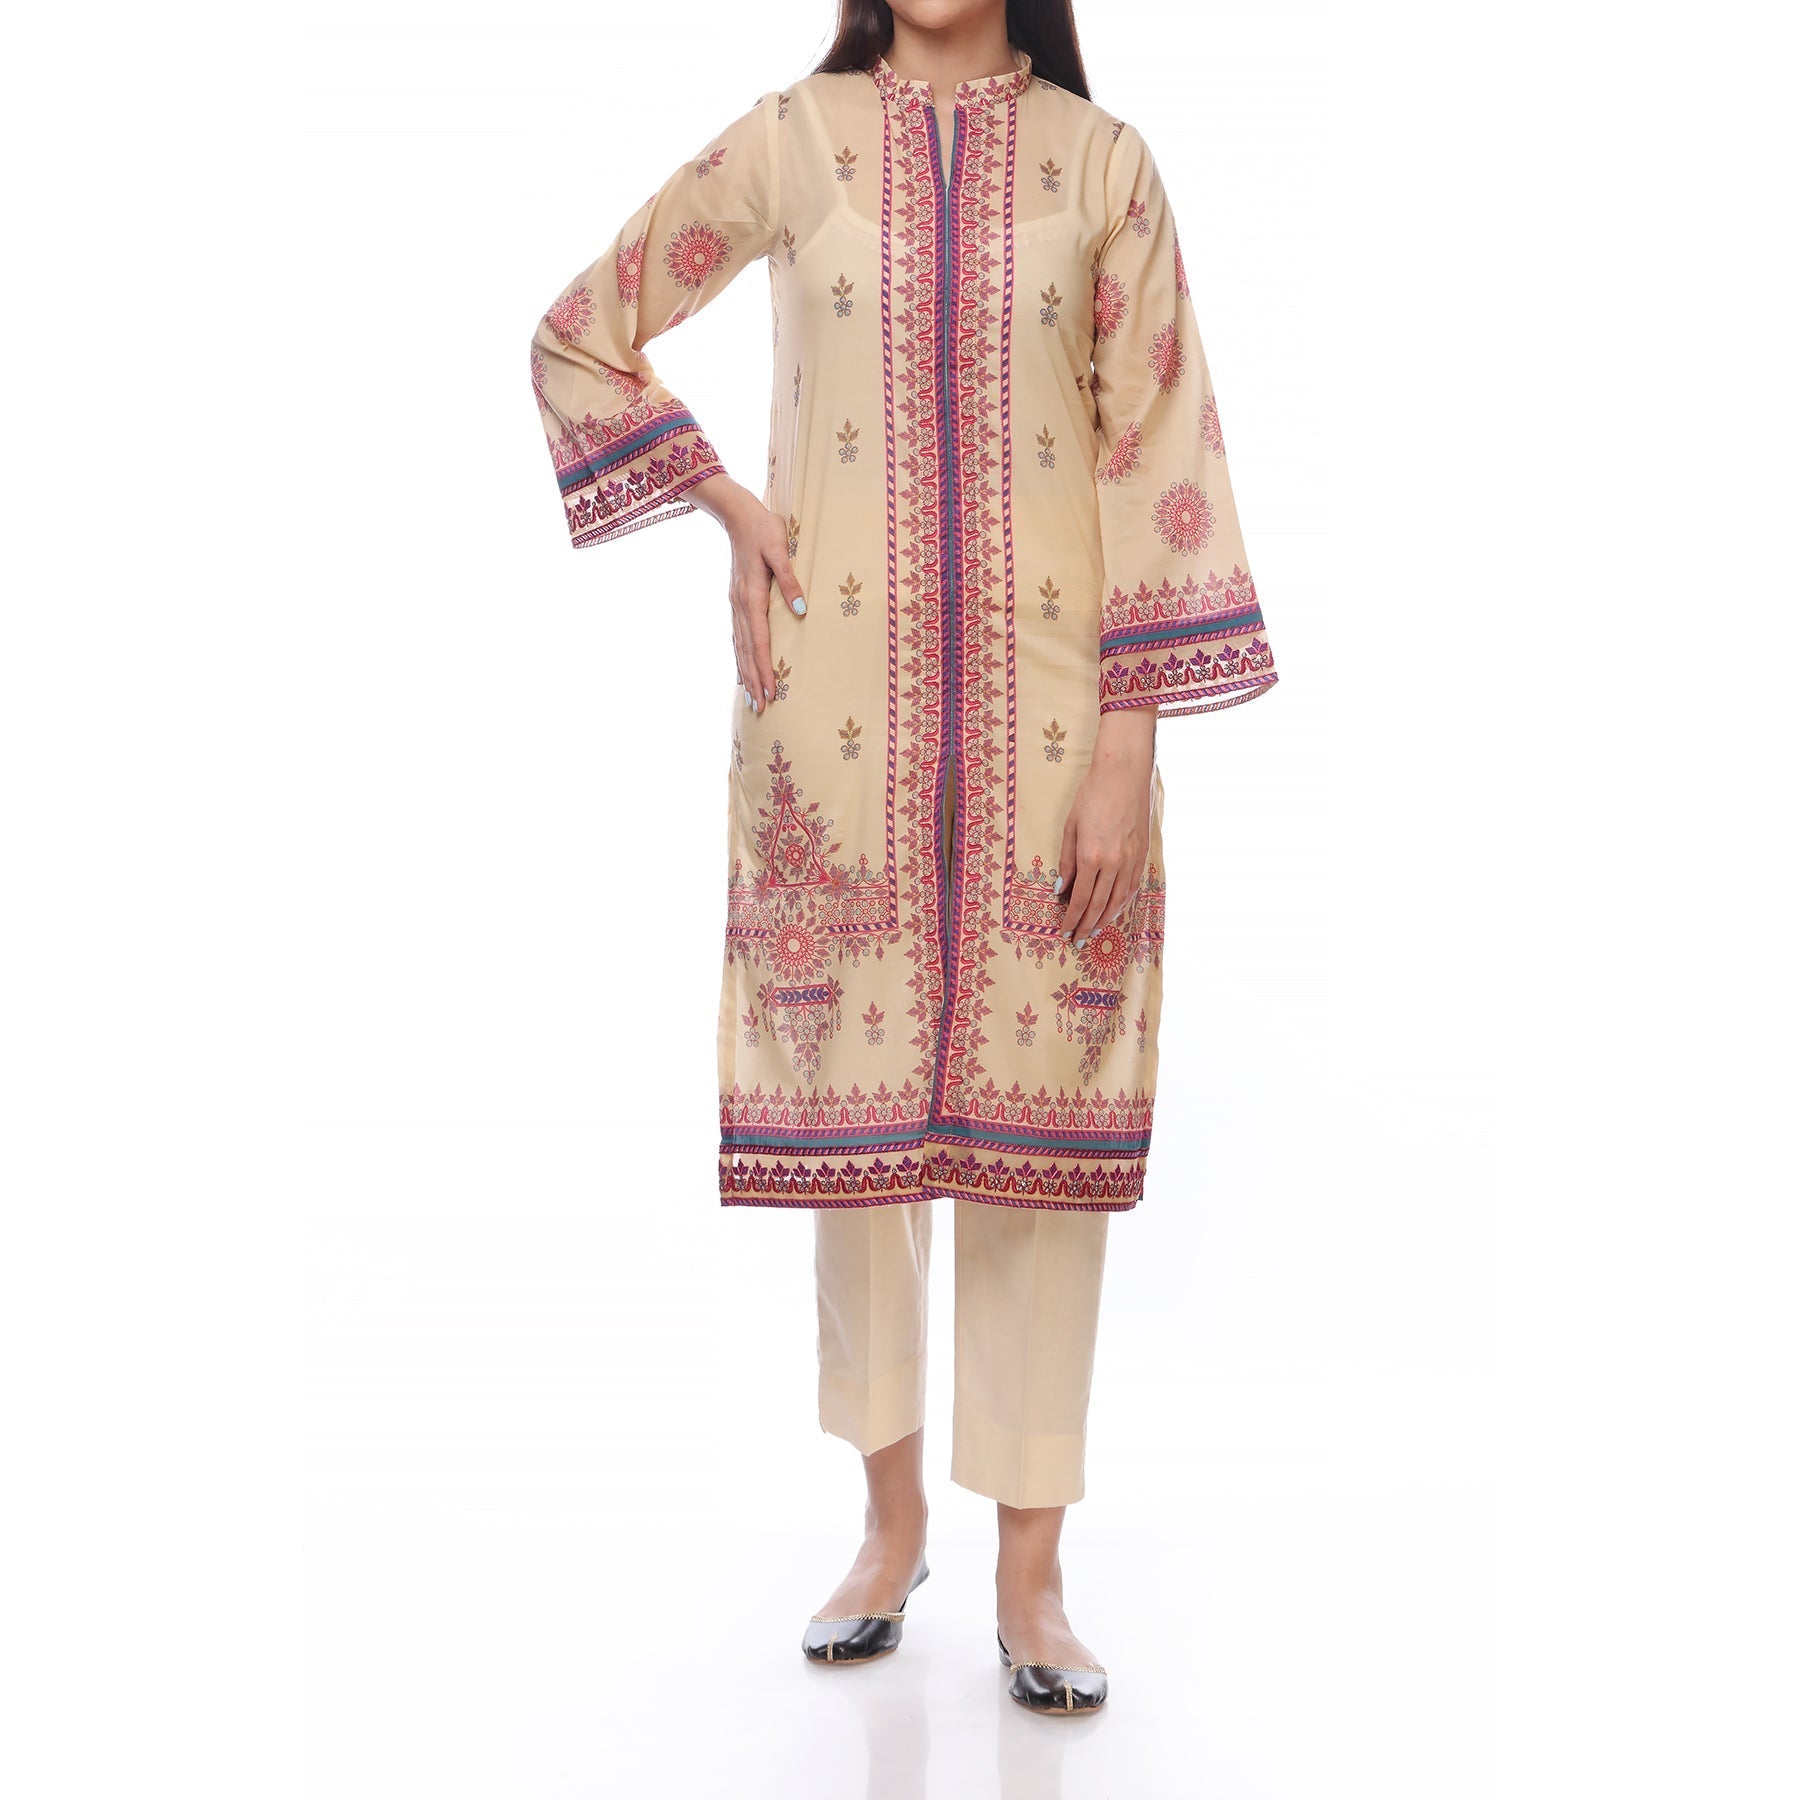 Digital Printed Lawn Shirt With Embroidered Lace for Cuff and Bottom